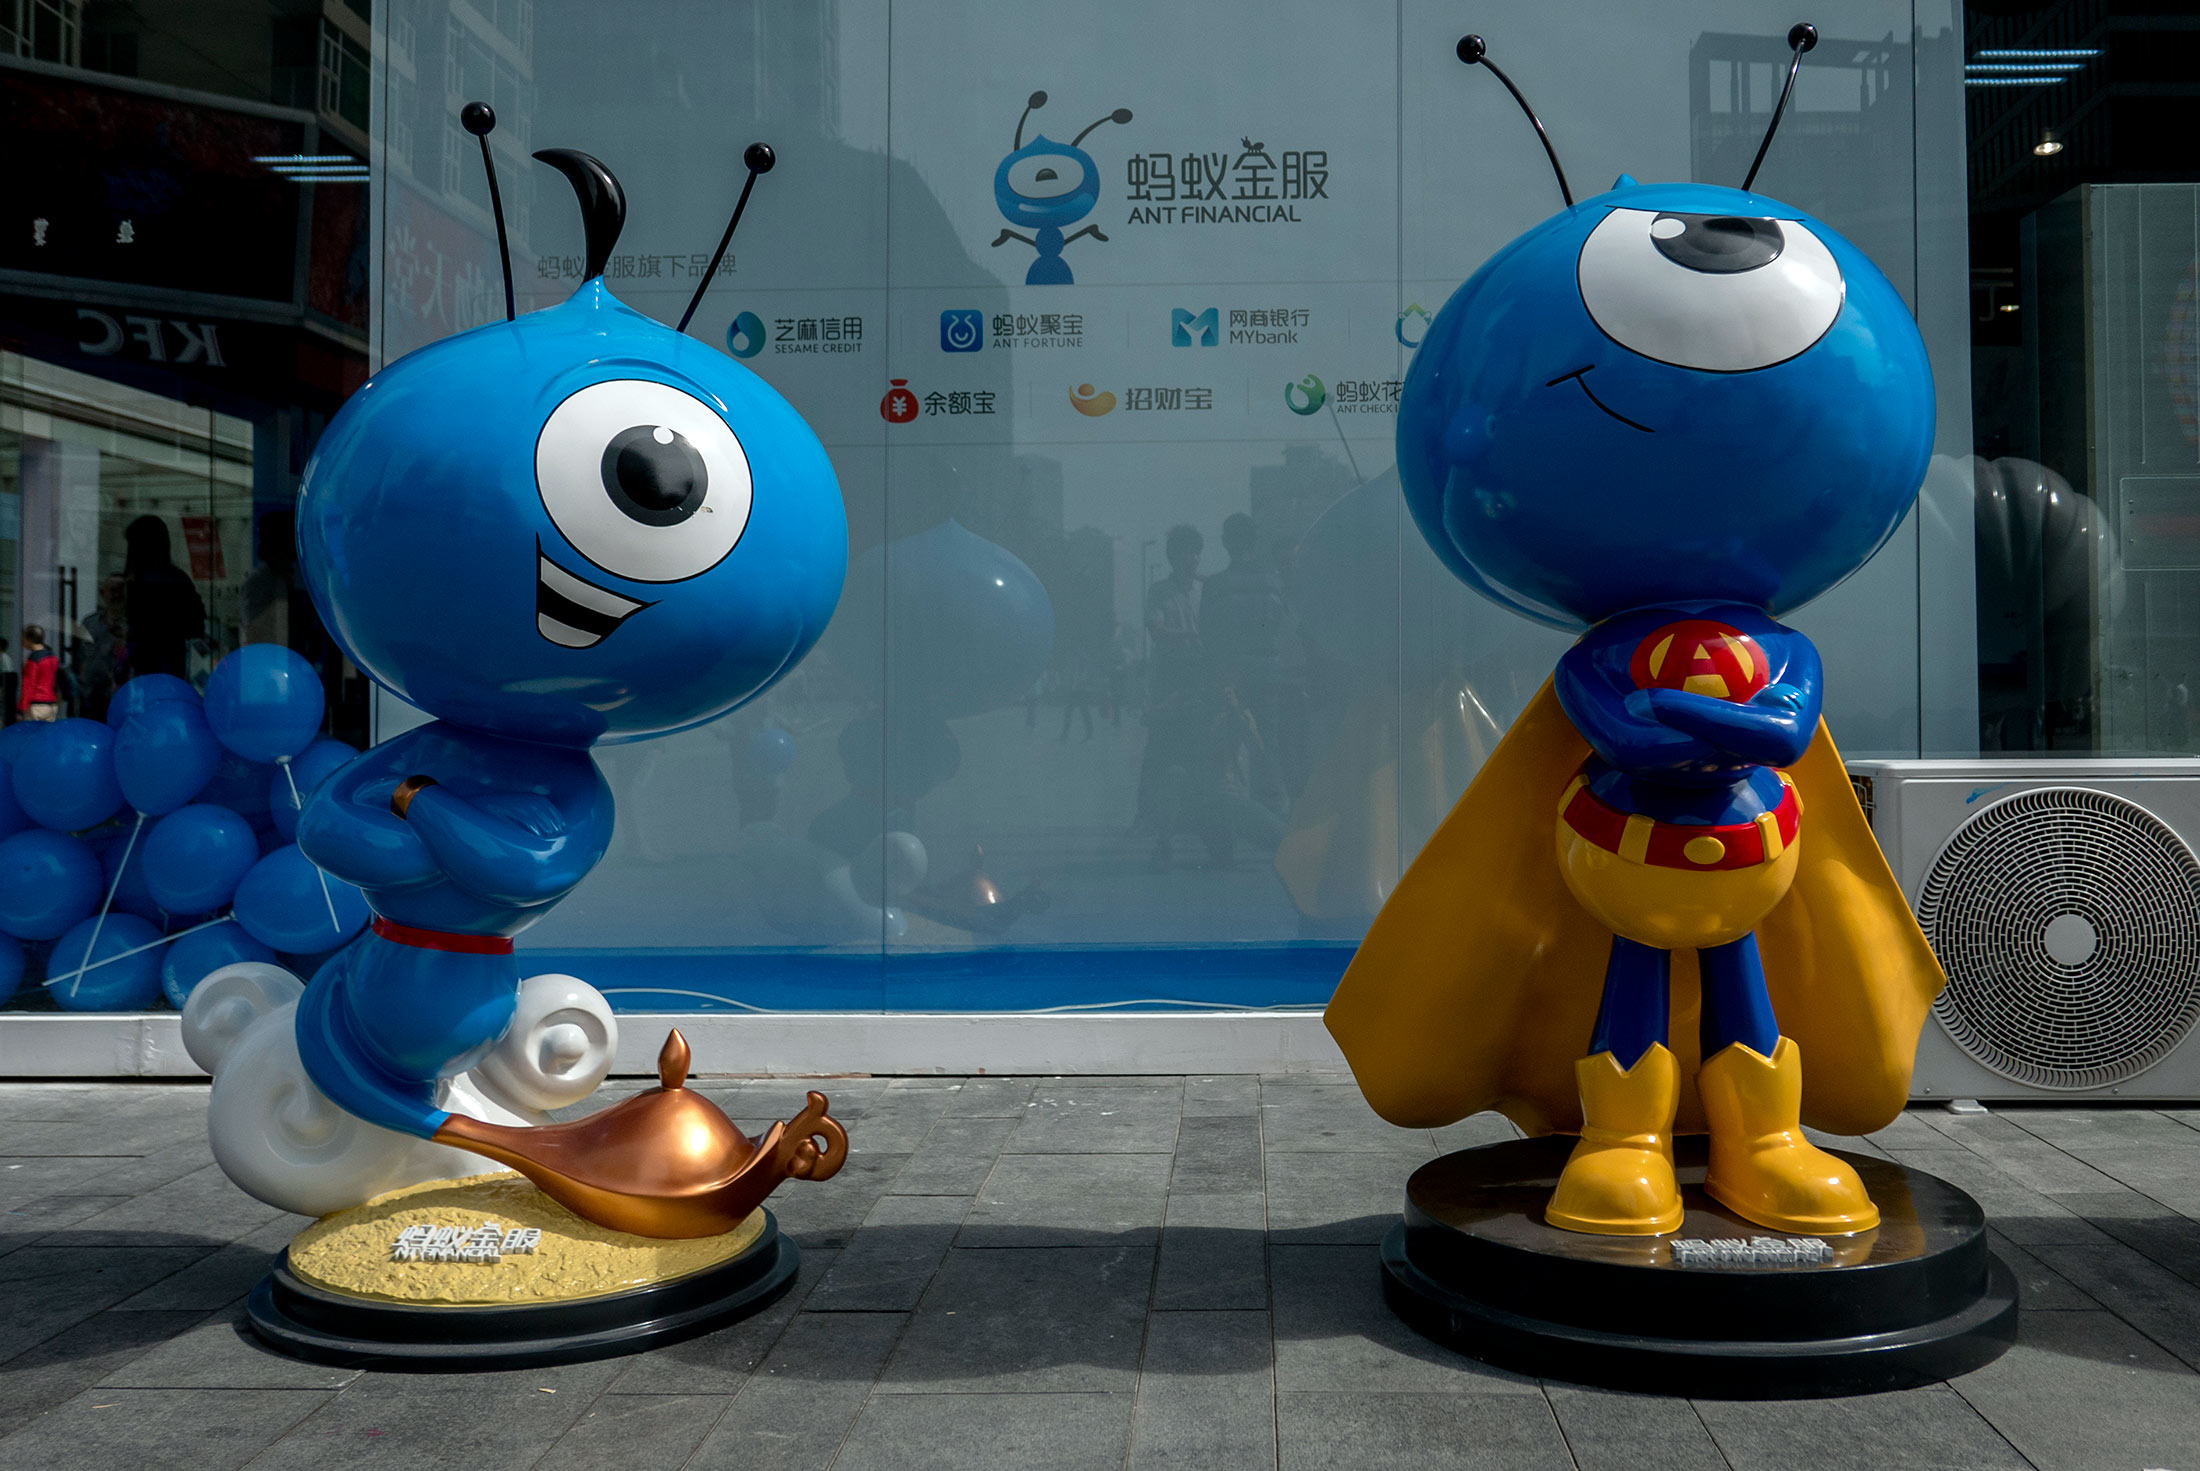 Mascots of Ant financial in Chengdu, China.
